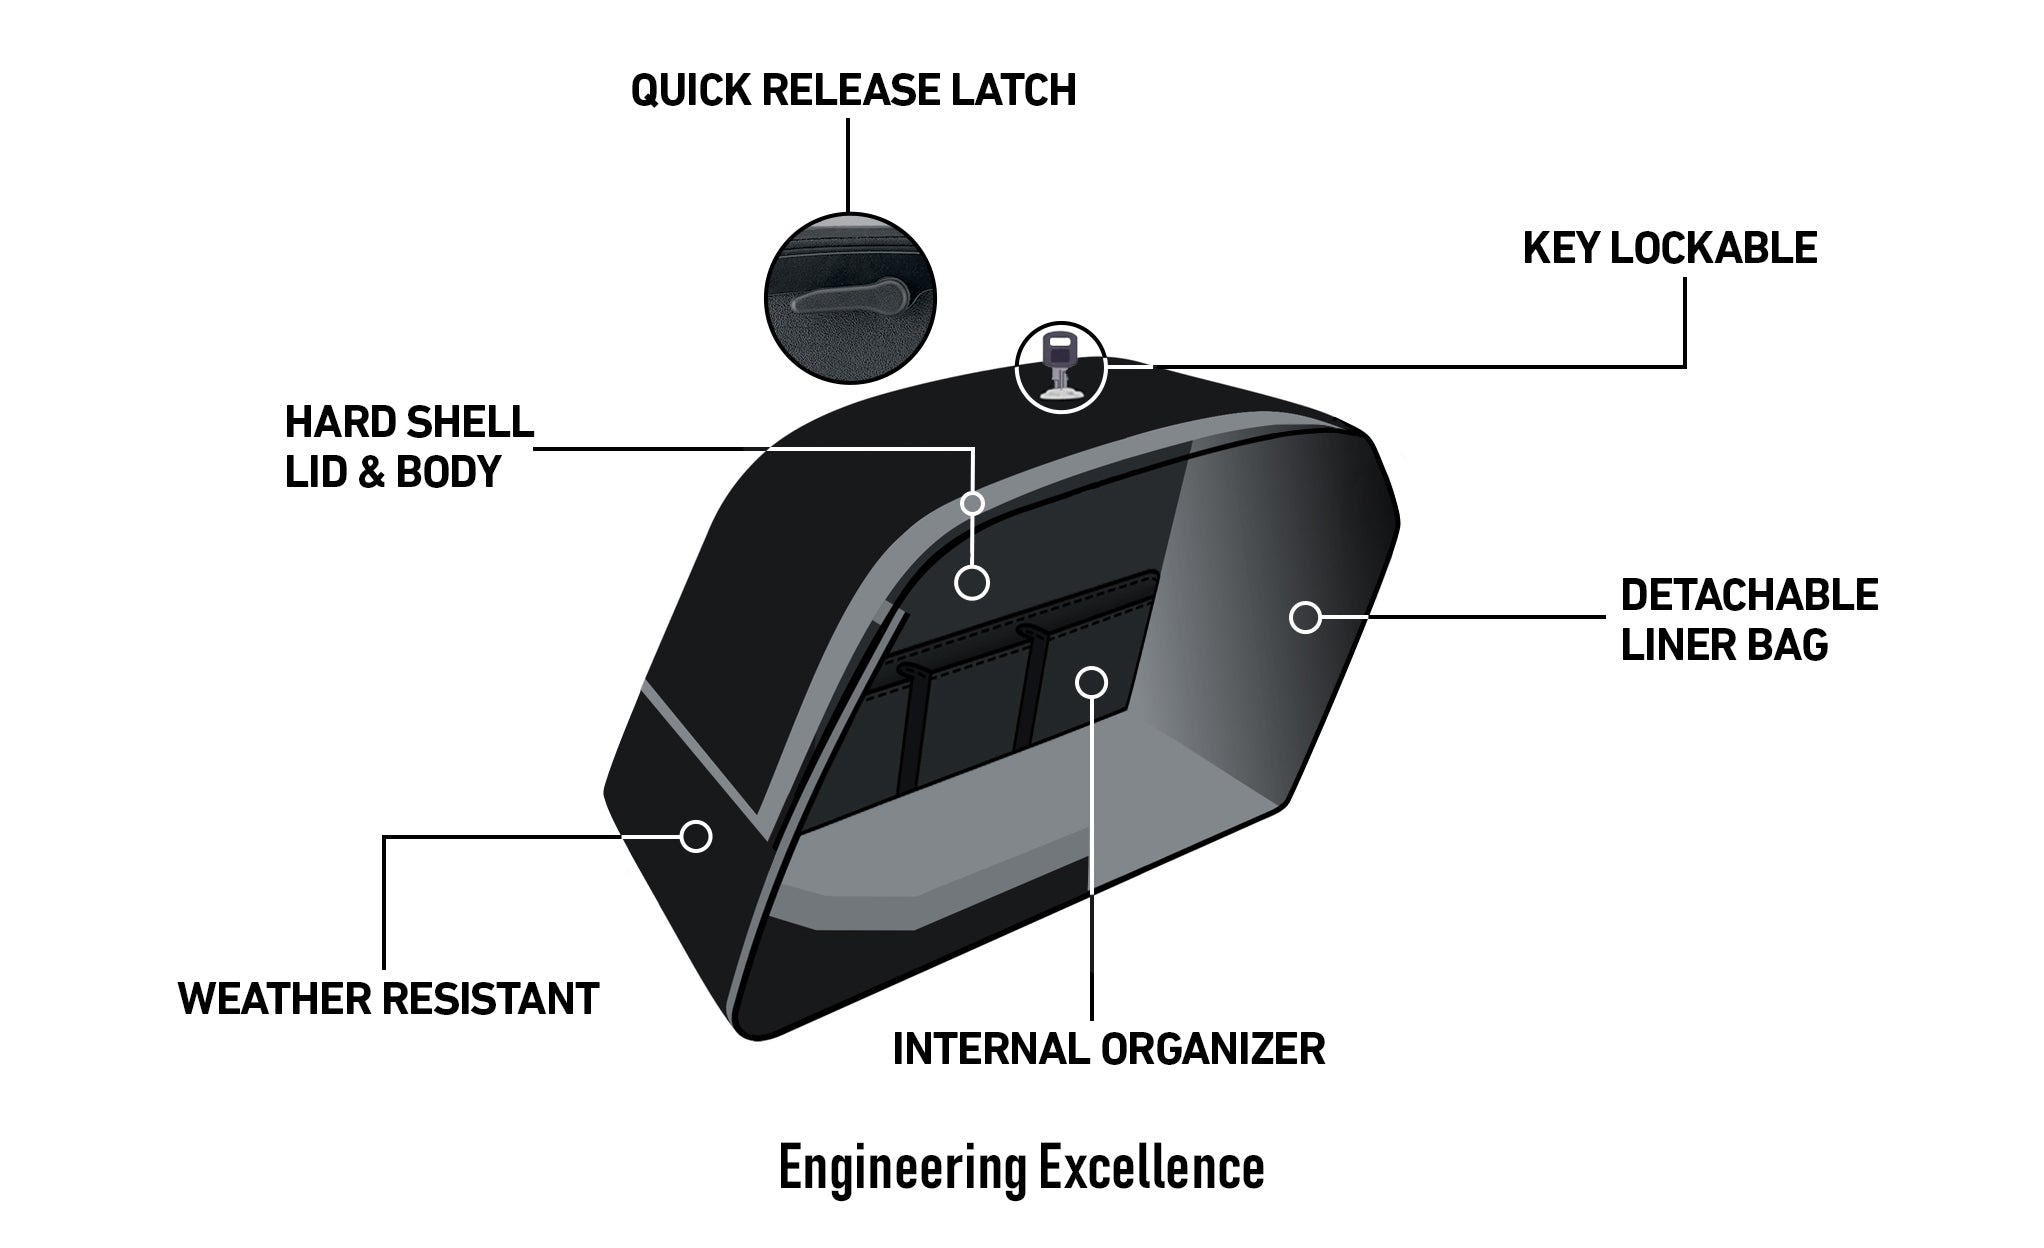 Viking Baldur Extra Large Matte Motorcycle Hard Saddlebags For Harley Softail Standard Fxst I Engineering Excellence with Bag on Bike @expand